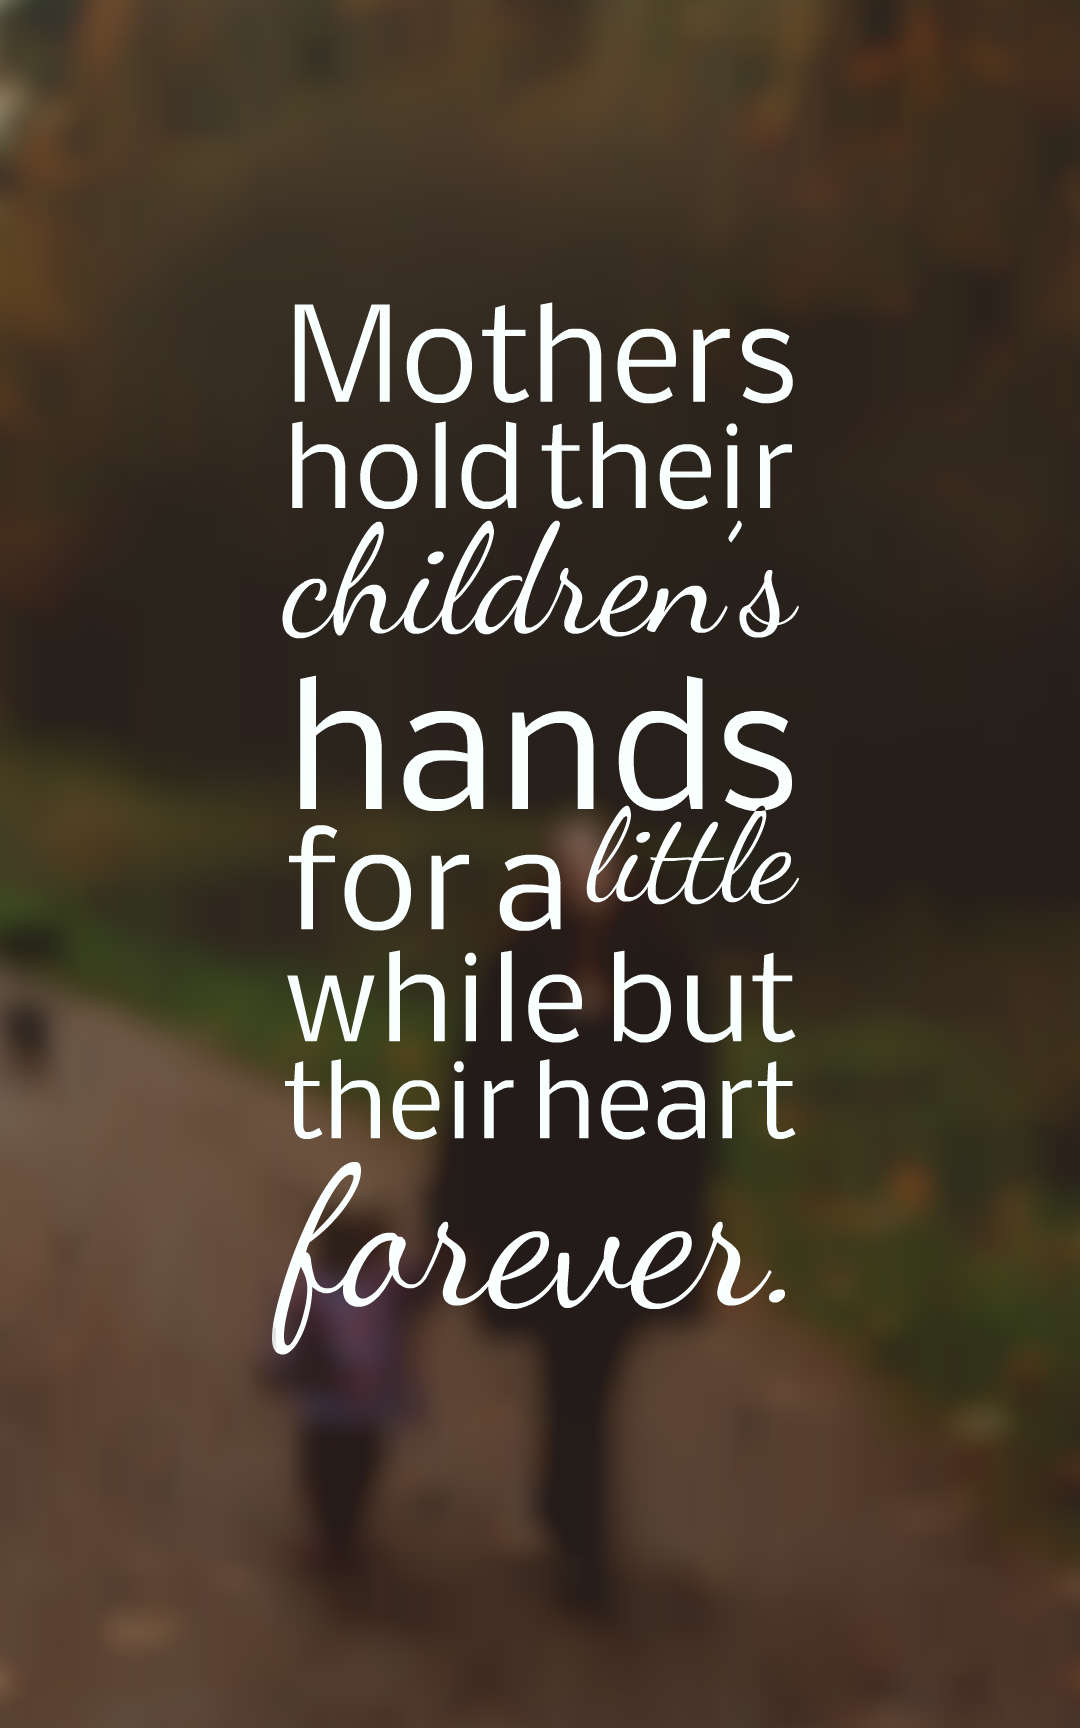 Mothers hold their children’s hands for a little while but their heart forever.